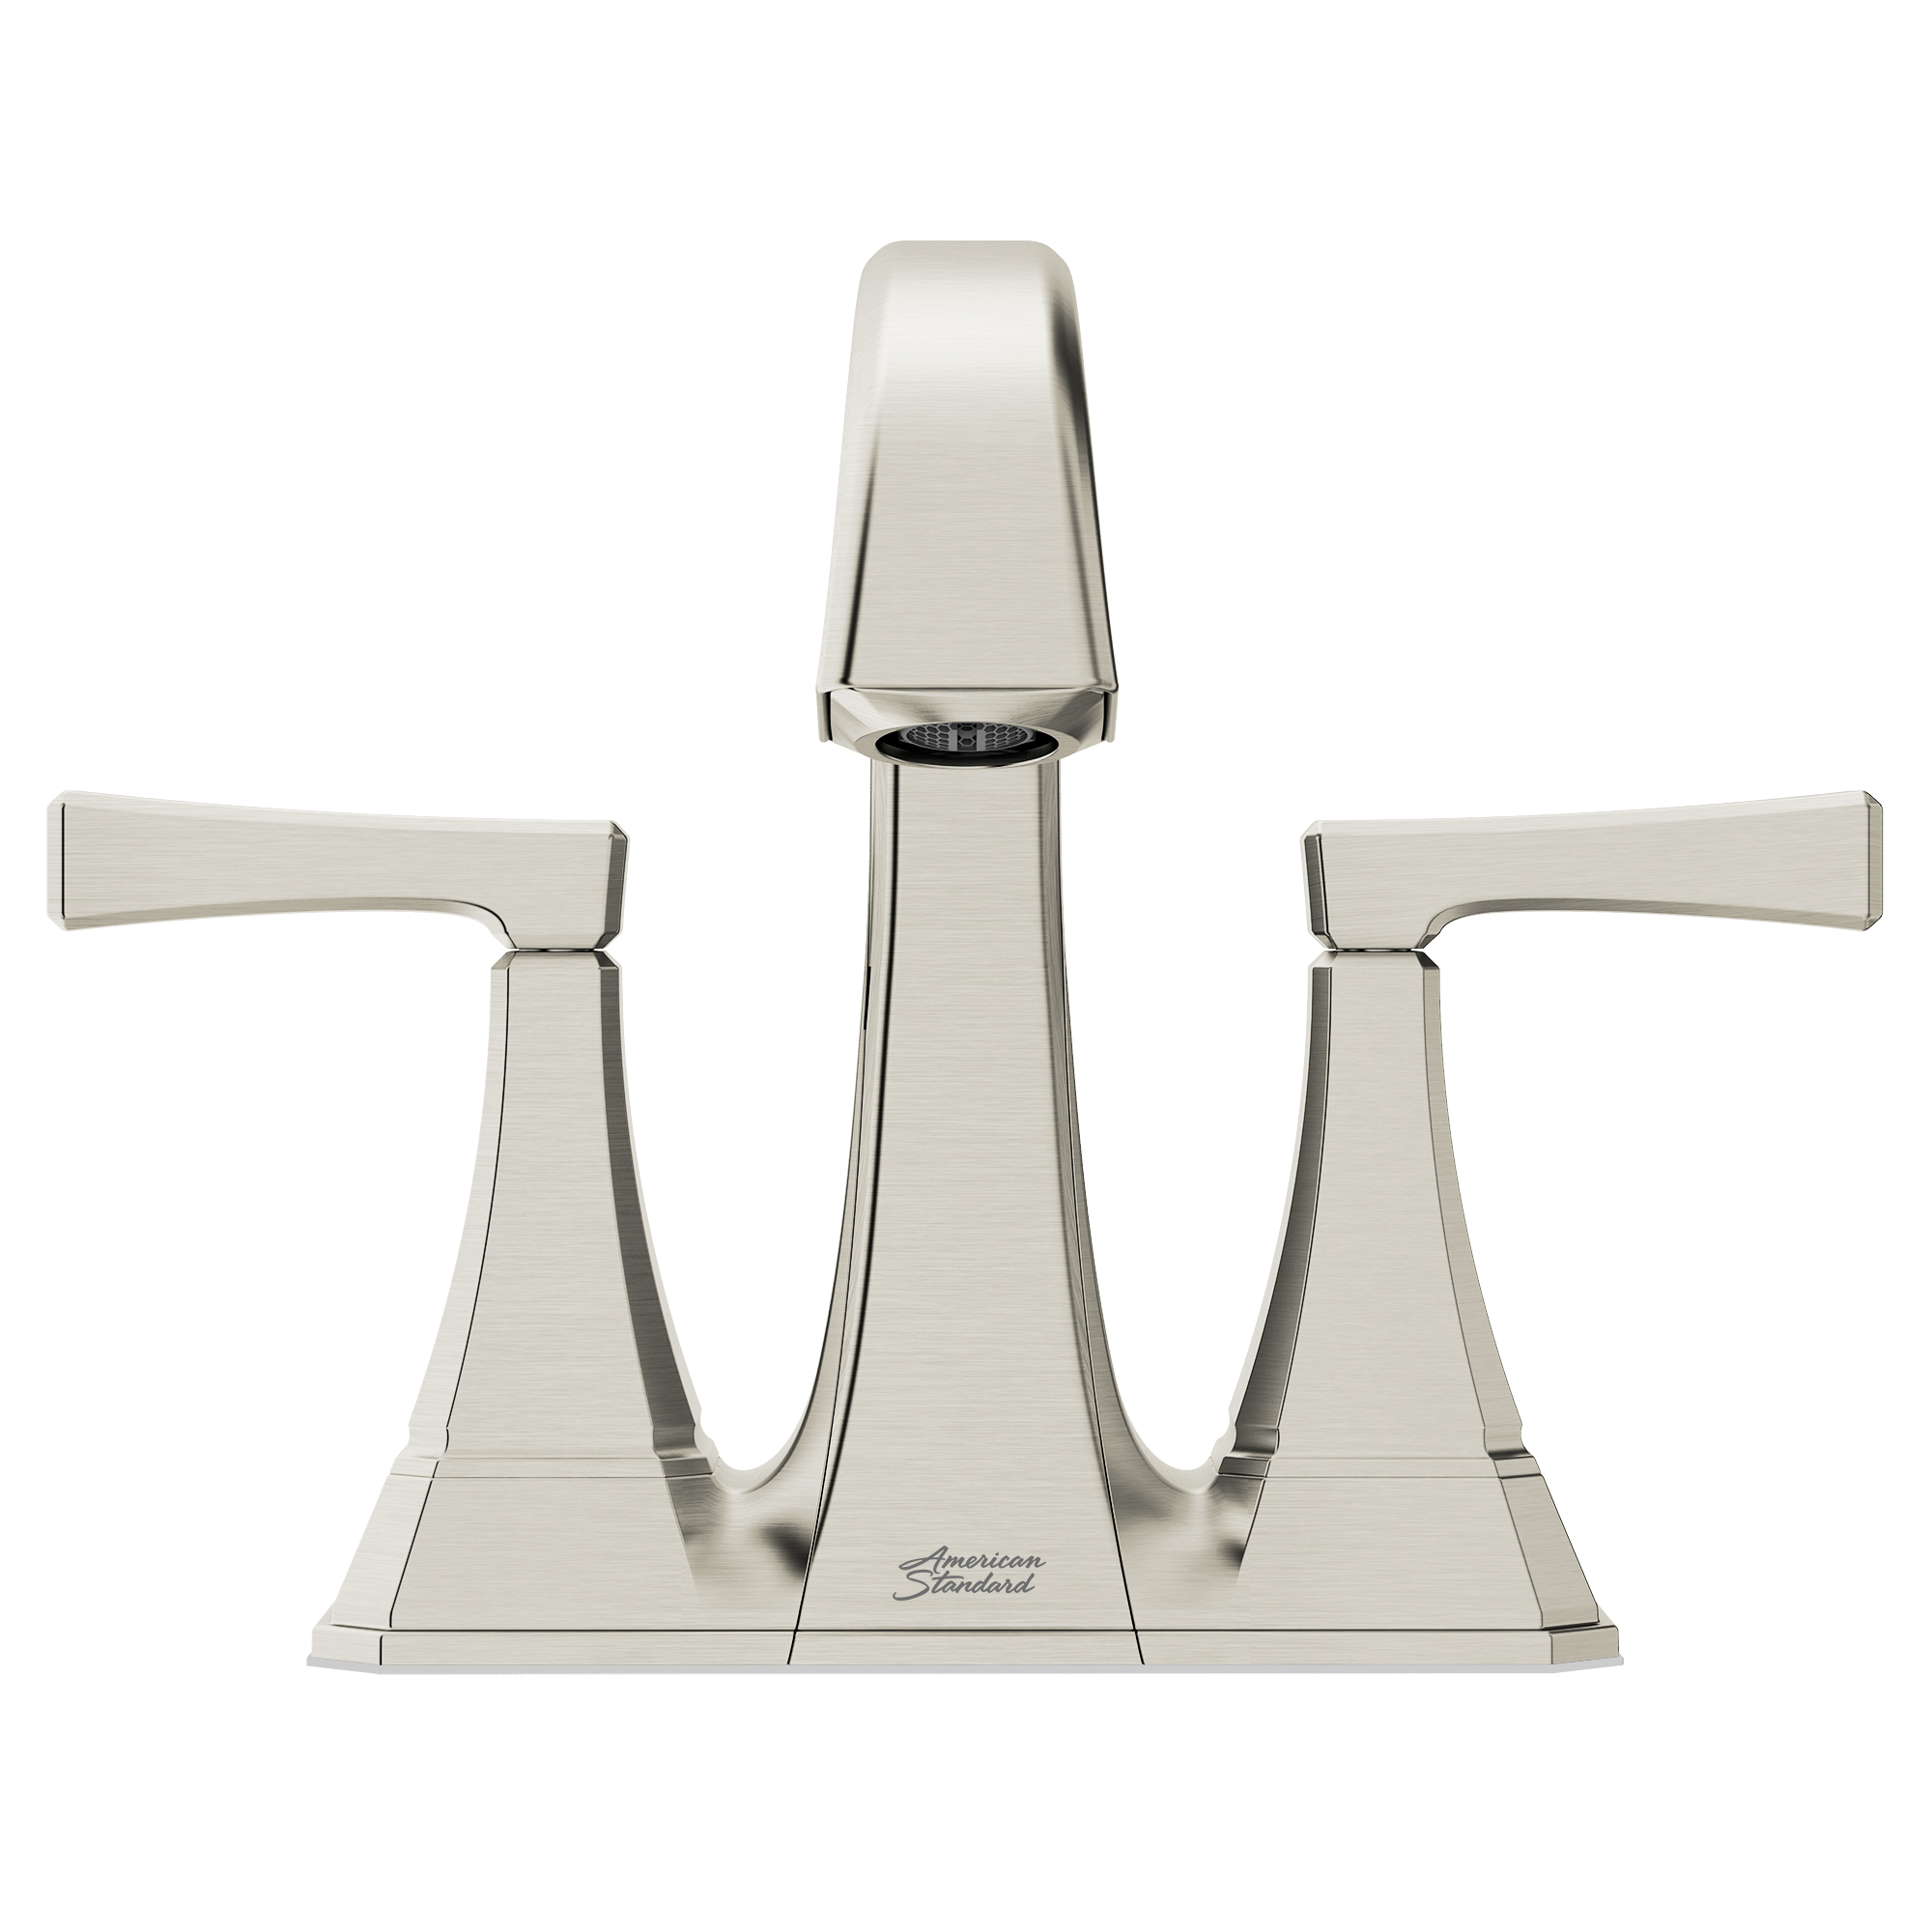 Crawford™ 4-Inch Centerset 2-Handle Bathroom Faucet 1.2 gpm/4.5 L/min With Lever Handles